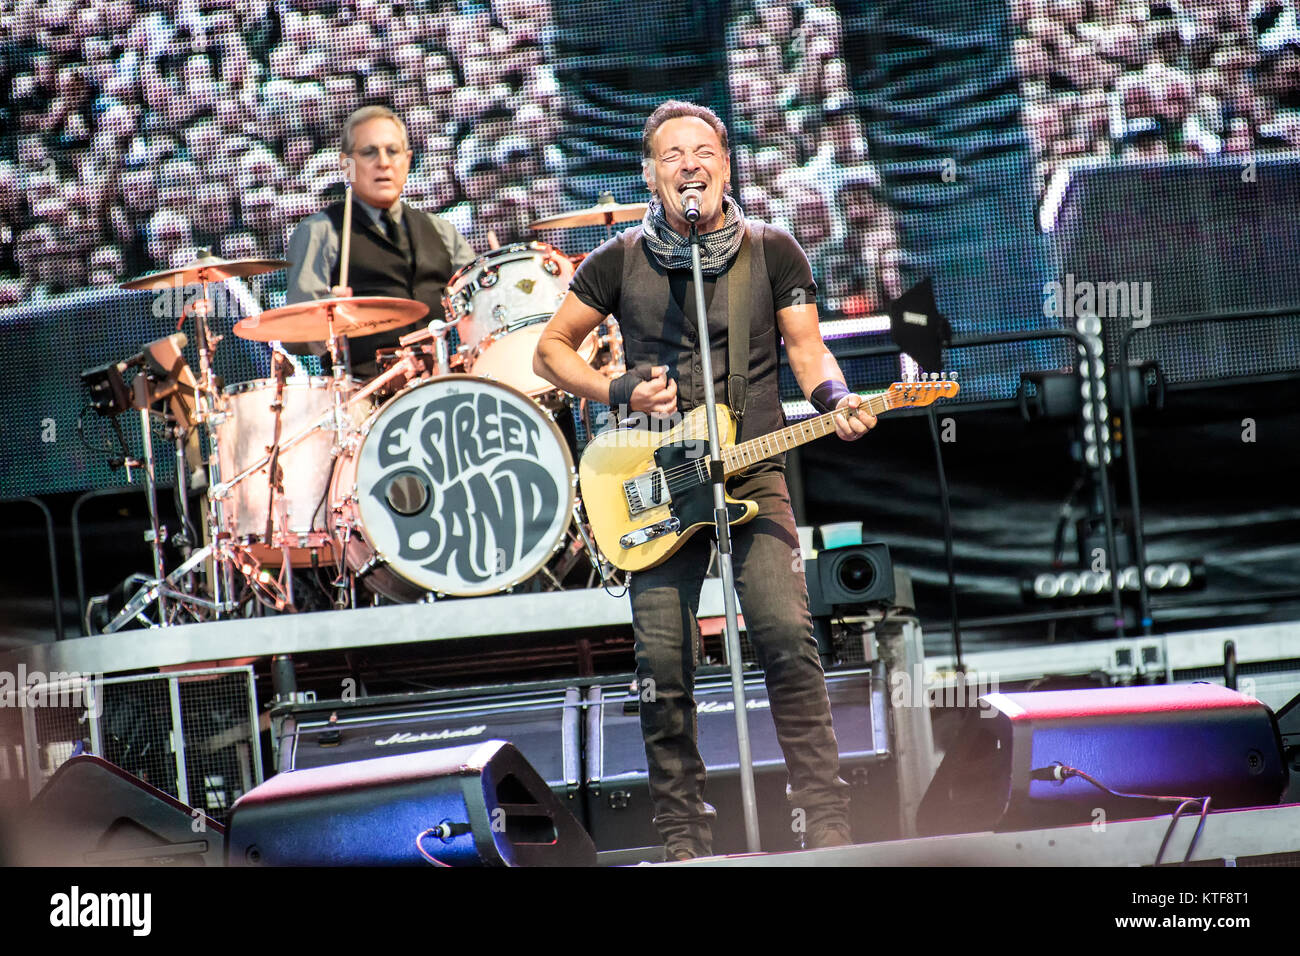 The American singer, songwriter and musician Bruce Springsteen performs a live concert with his band The E Street Band at Ullevaal Stadion in Oslo. Bruce Springsteen is also known as The Boss and the concert was part of The River Tour. Norway, 29/06 2016. Stock Photo